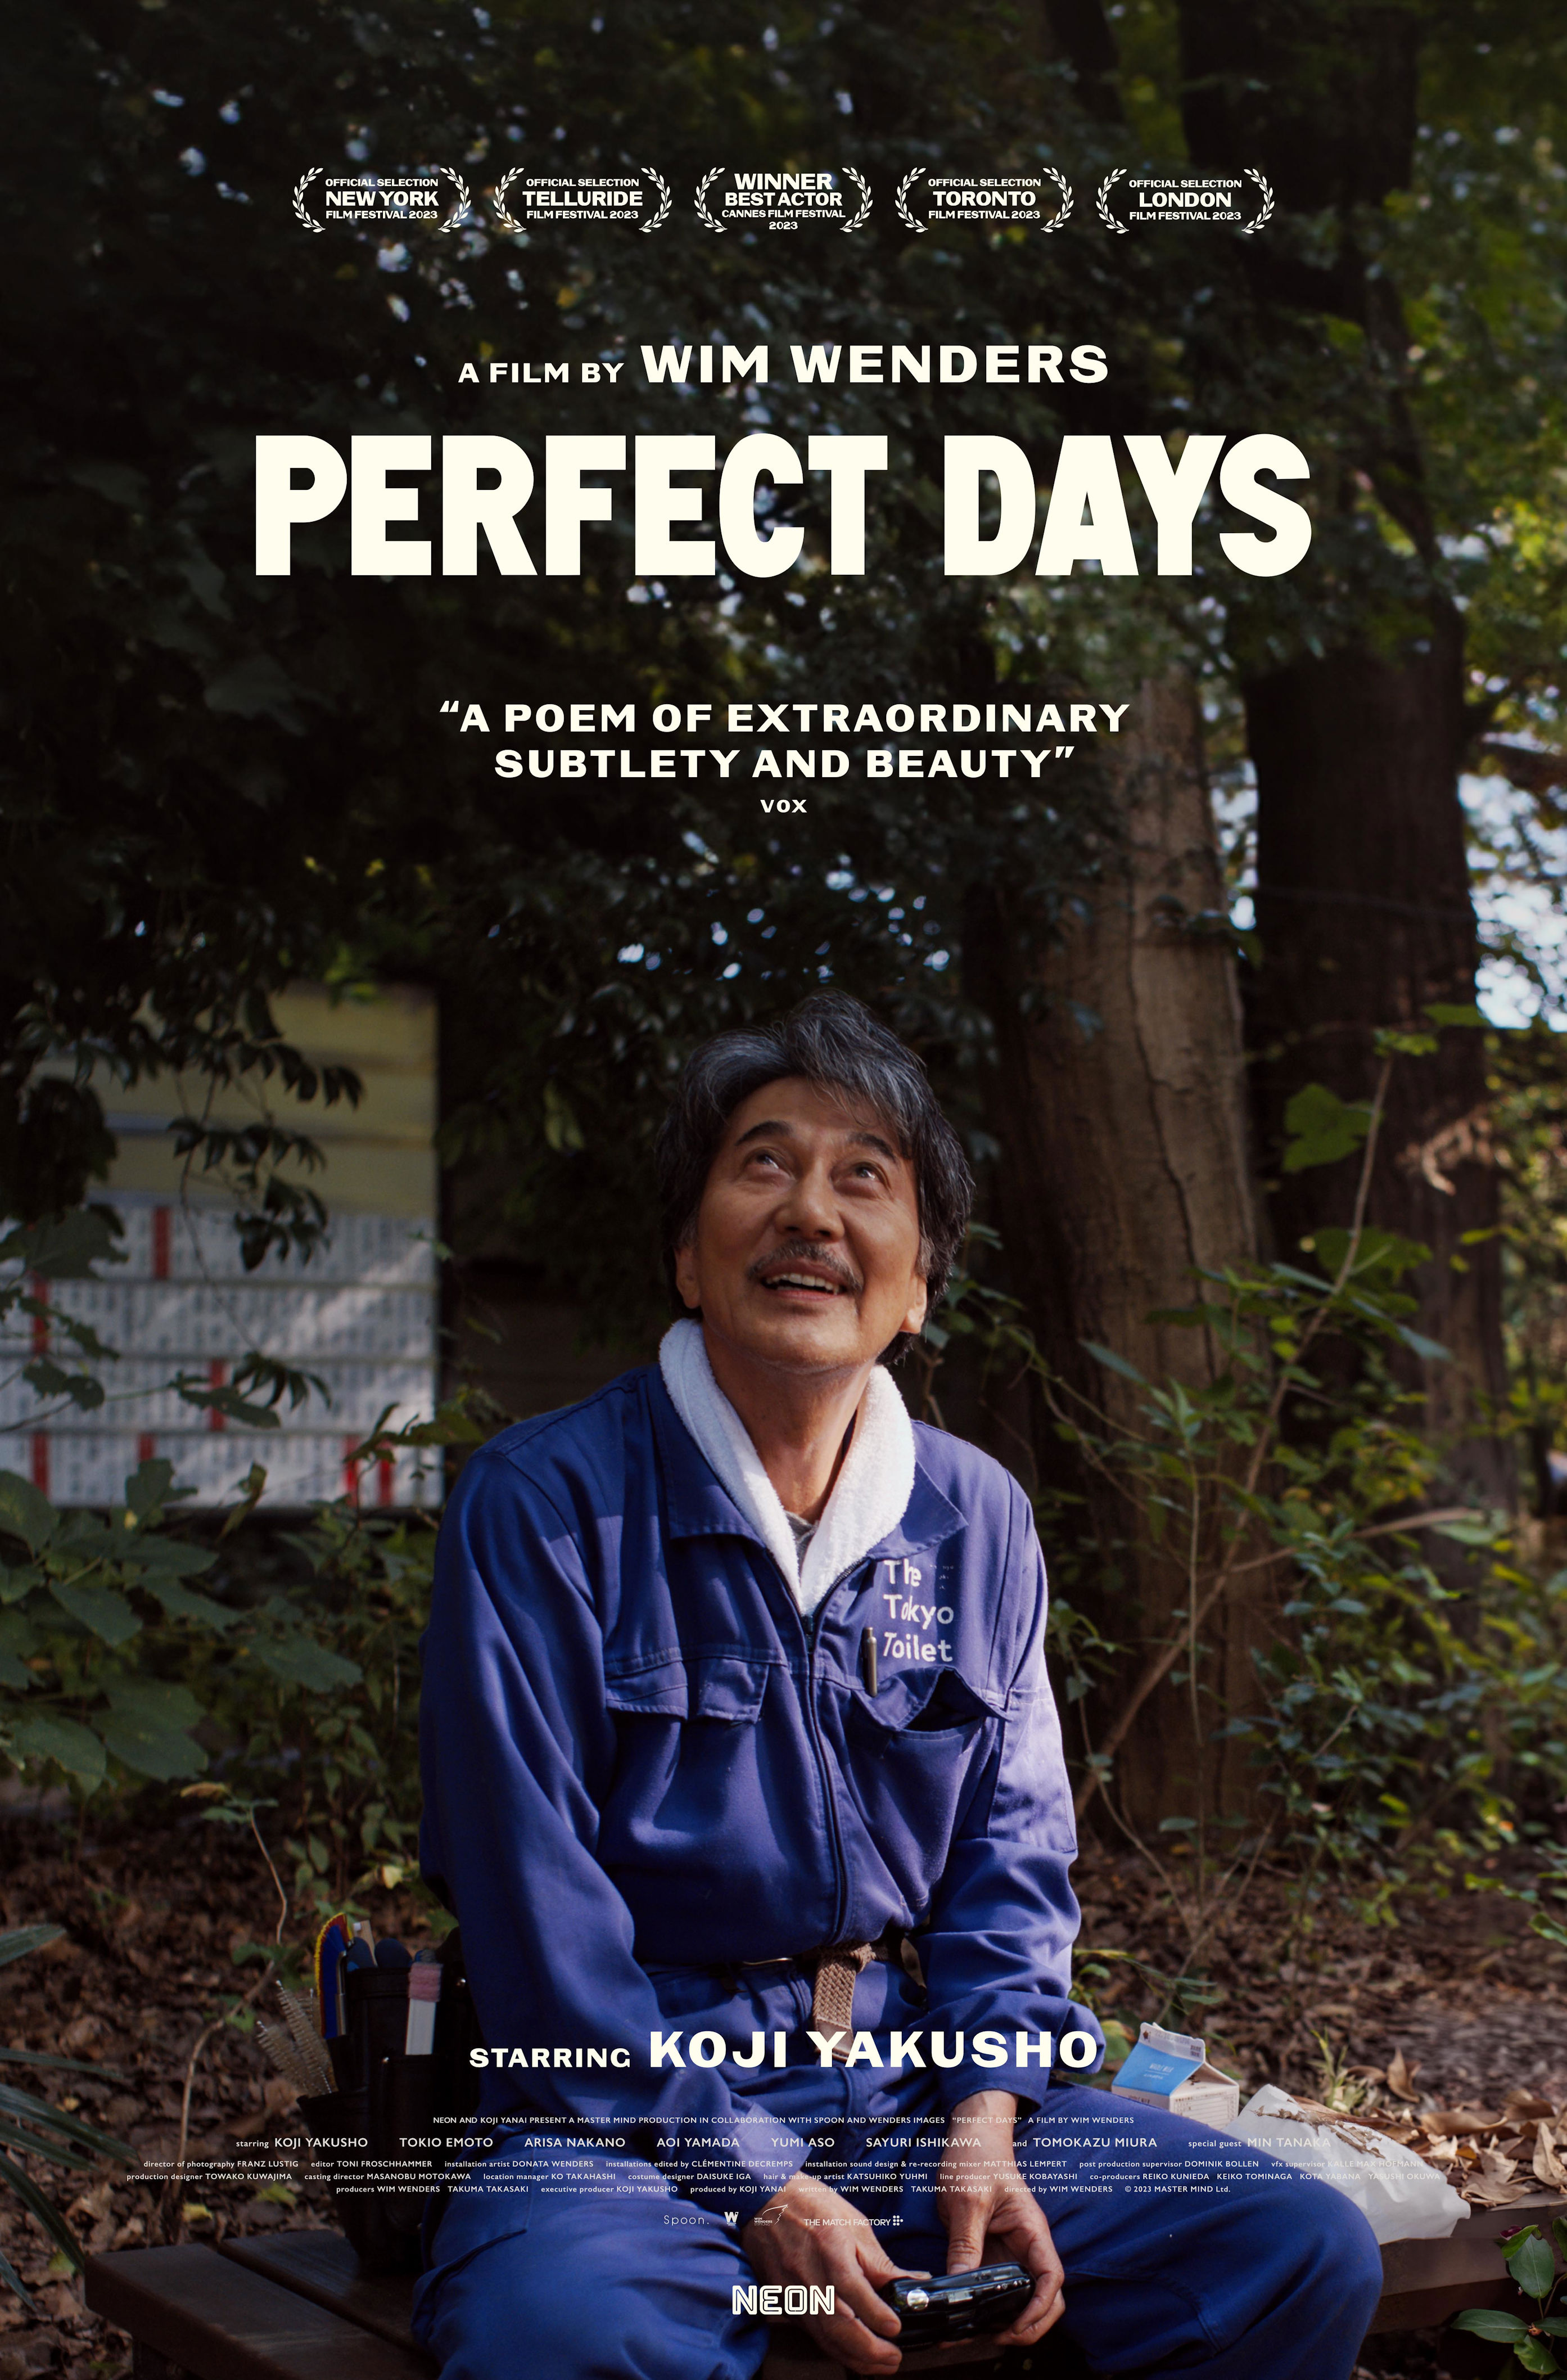 <p>"Perfect Days," which was nominated for best international feature at the <a href="https://www.wonderwall.com/celebrity/photos/the-most-talked-about-moments-from-the-2024-academy-awards-844884.gallery">2024 Oscars</a>, finally debuted in the United States in February -- nearly a year after star Kōji Yakusho won the award for best actor at the <a href="https://www.wonderwall.com/celebrity/cannes-film-festival-2023-738818.gallery">2023 Cannes Film Festival</a>. The Japanese-German drama -- which centers around a man who cleans public toilets in Tokyo and the joy he finds in the simple things life has to offer -- also competed for the Palme d'Or and won the Prize of the Ecumenical Jury at Cannes last year. It has a 96% fresh rating with critics on Rotten Tomatoes.</p>